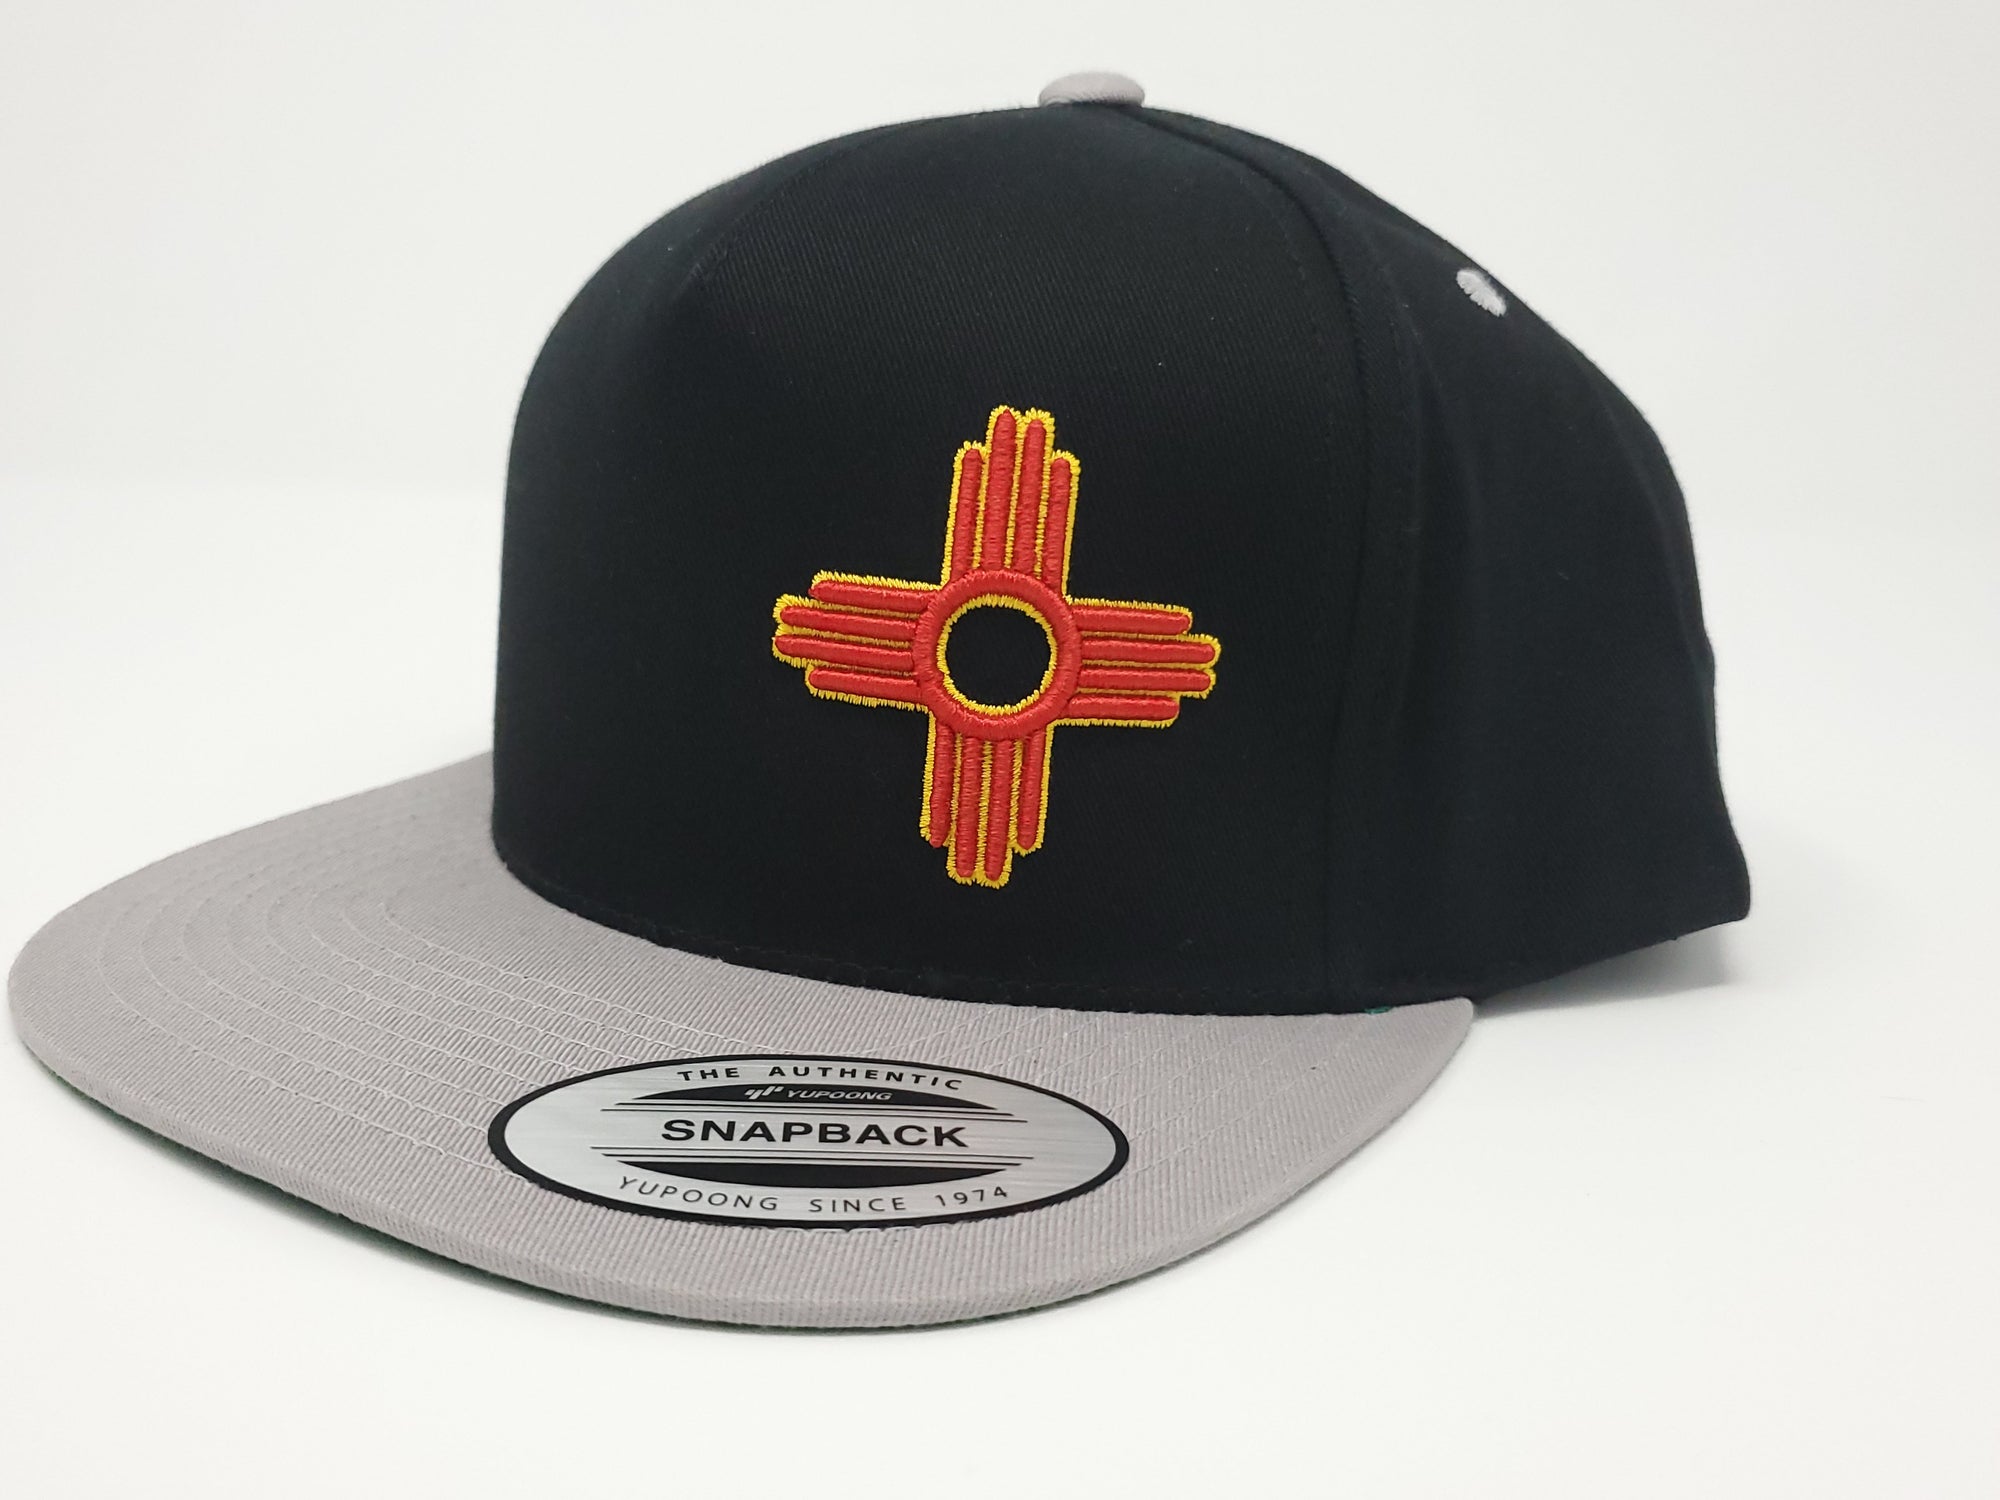 Zia Embroidered Flat Bill Snapback - Ragged Apparel Screen Printing and Signs - www.nmshirts.com